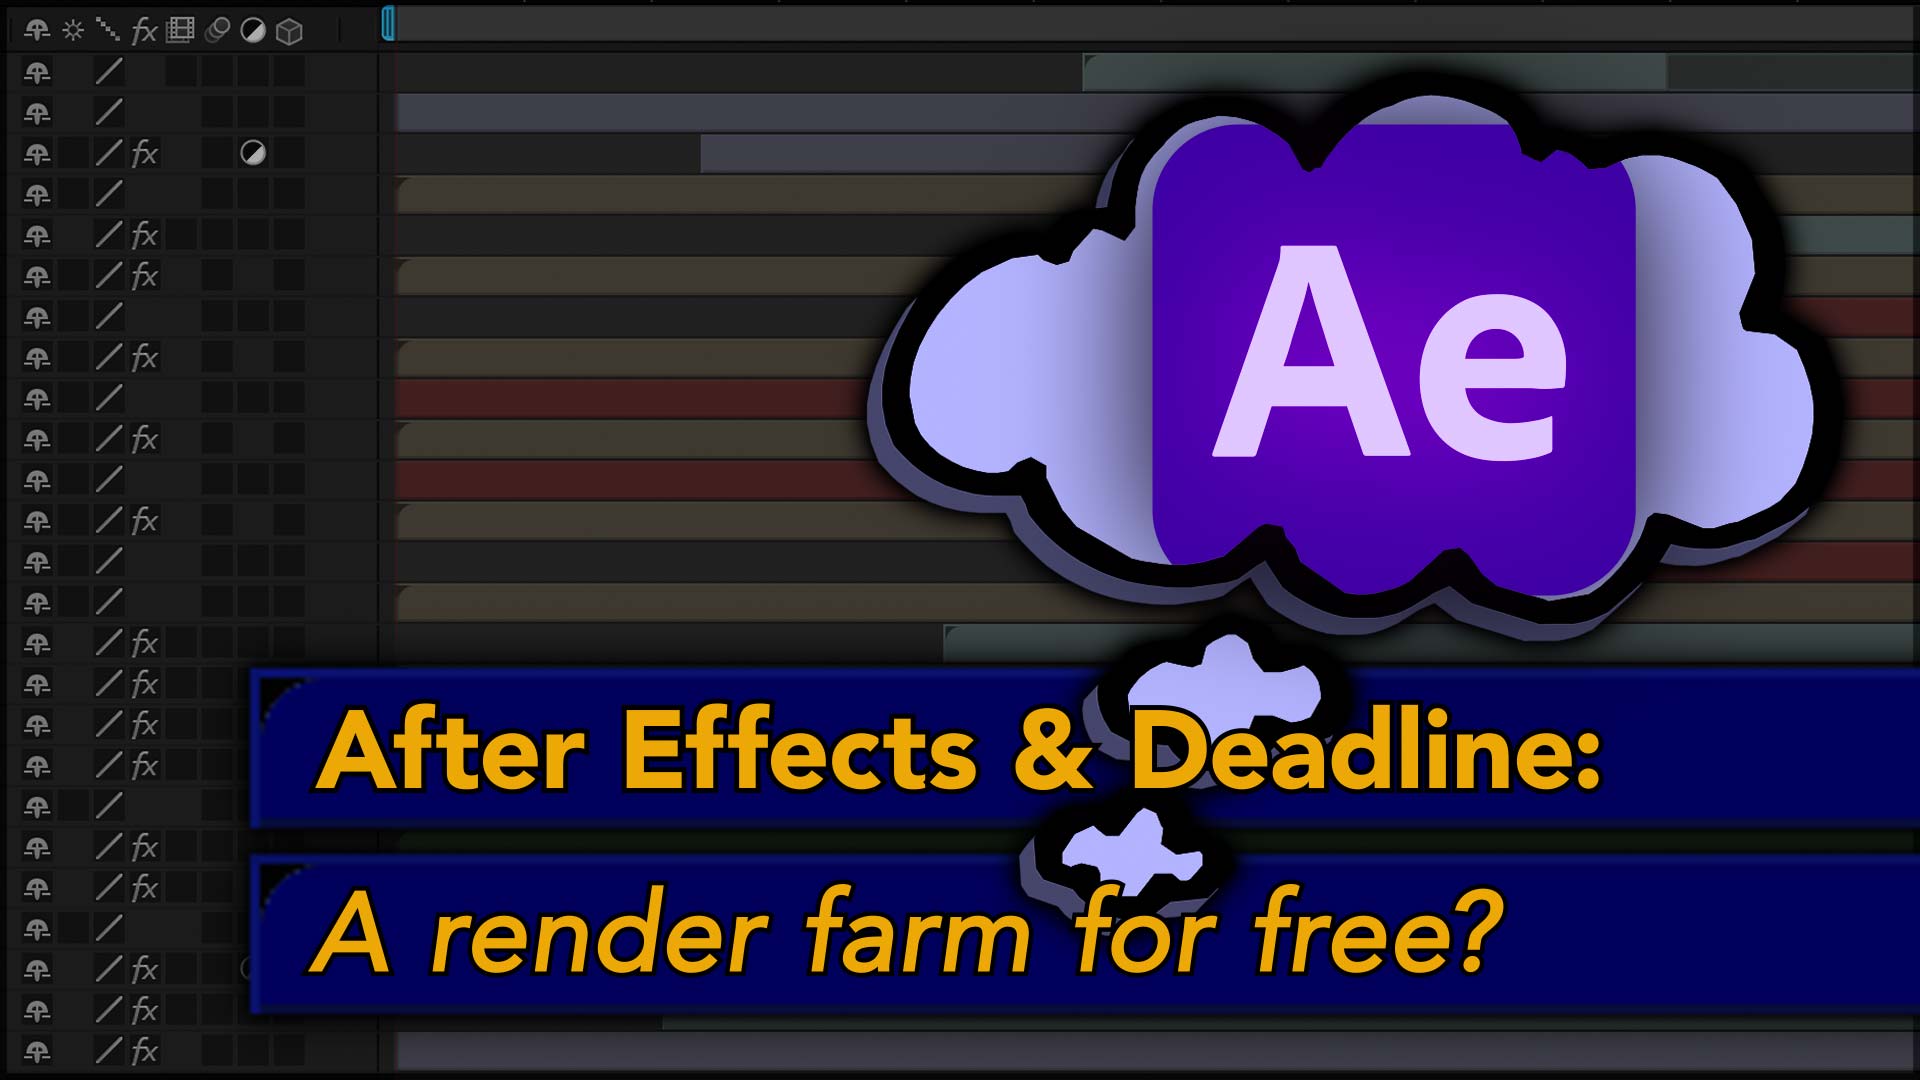 After Effects: Using Deadline for a Render Farm 19